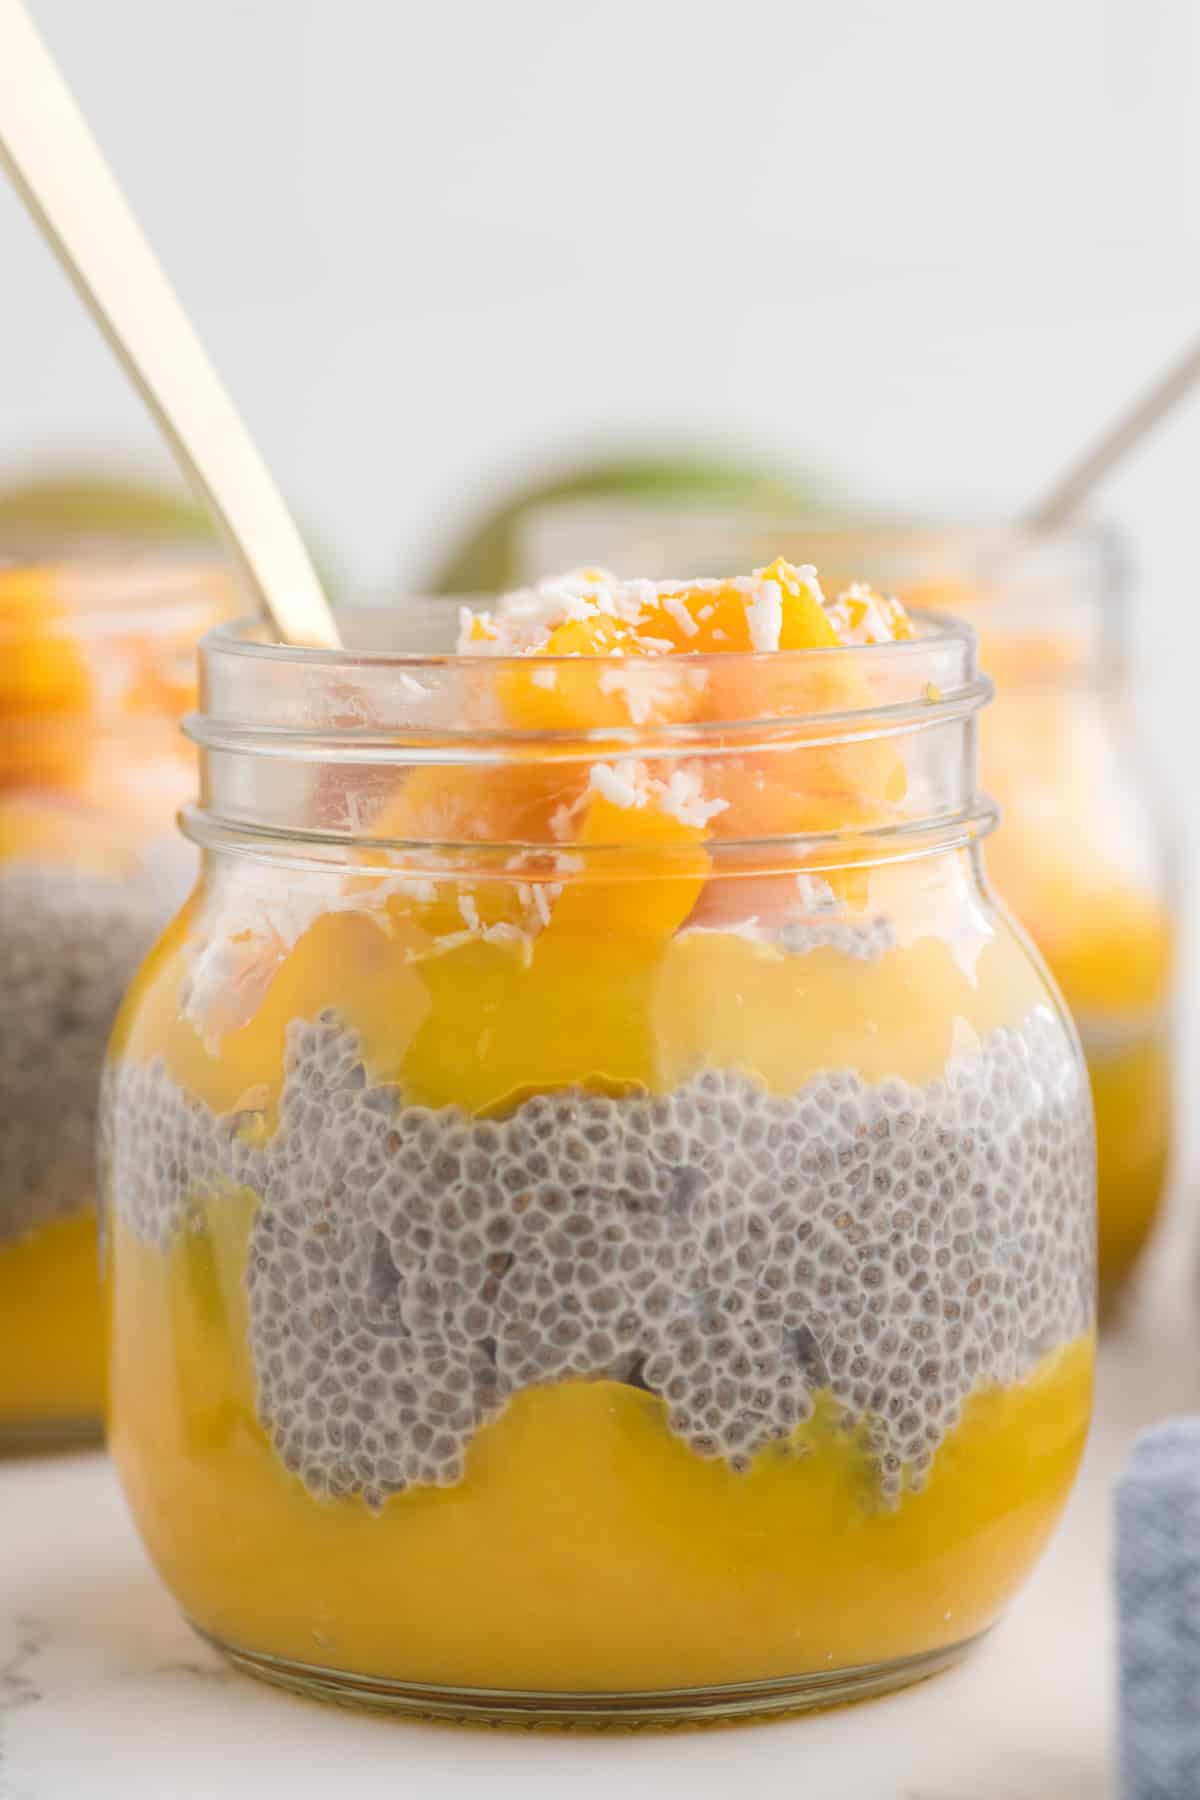 mango chia pudding in a jar with a spoon.